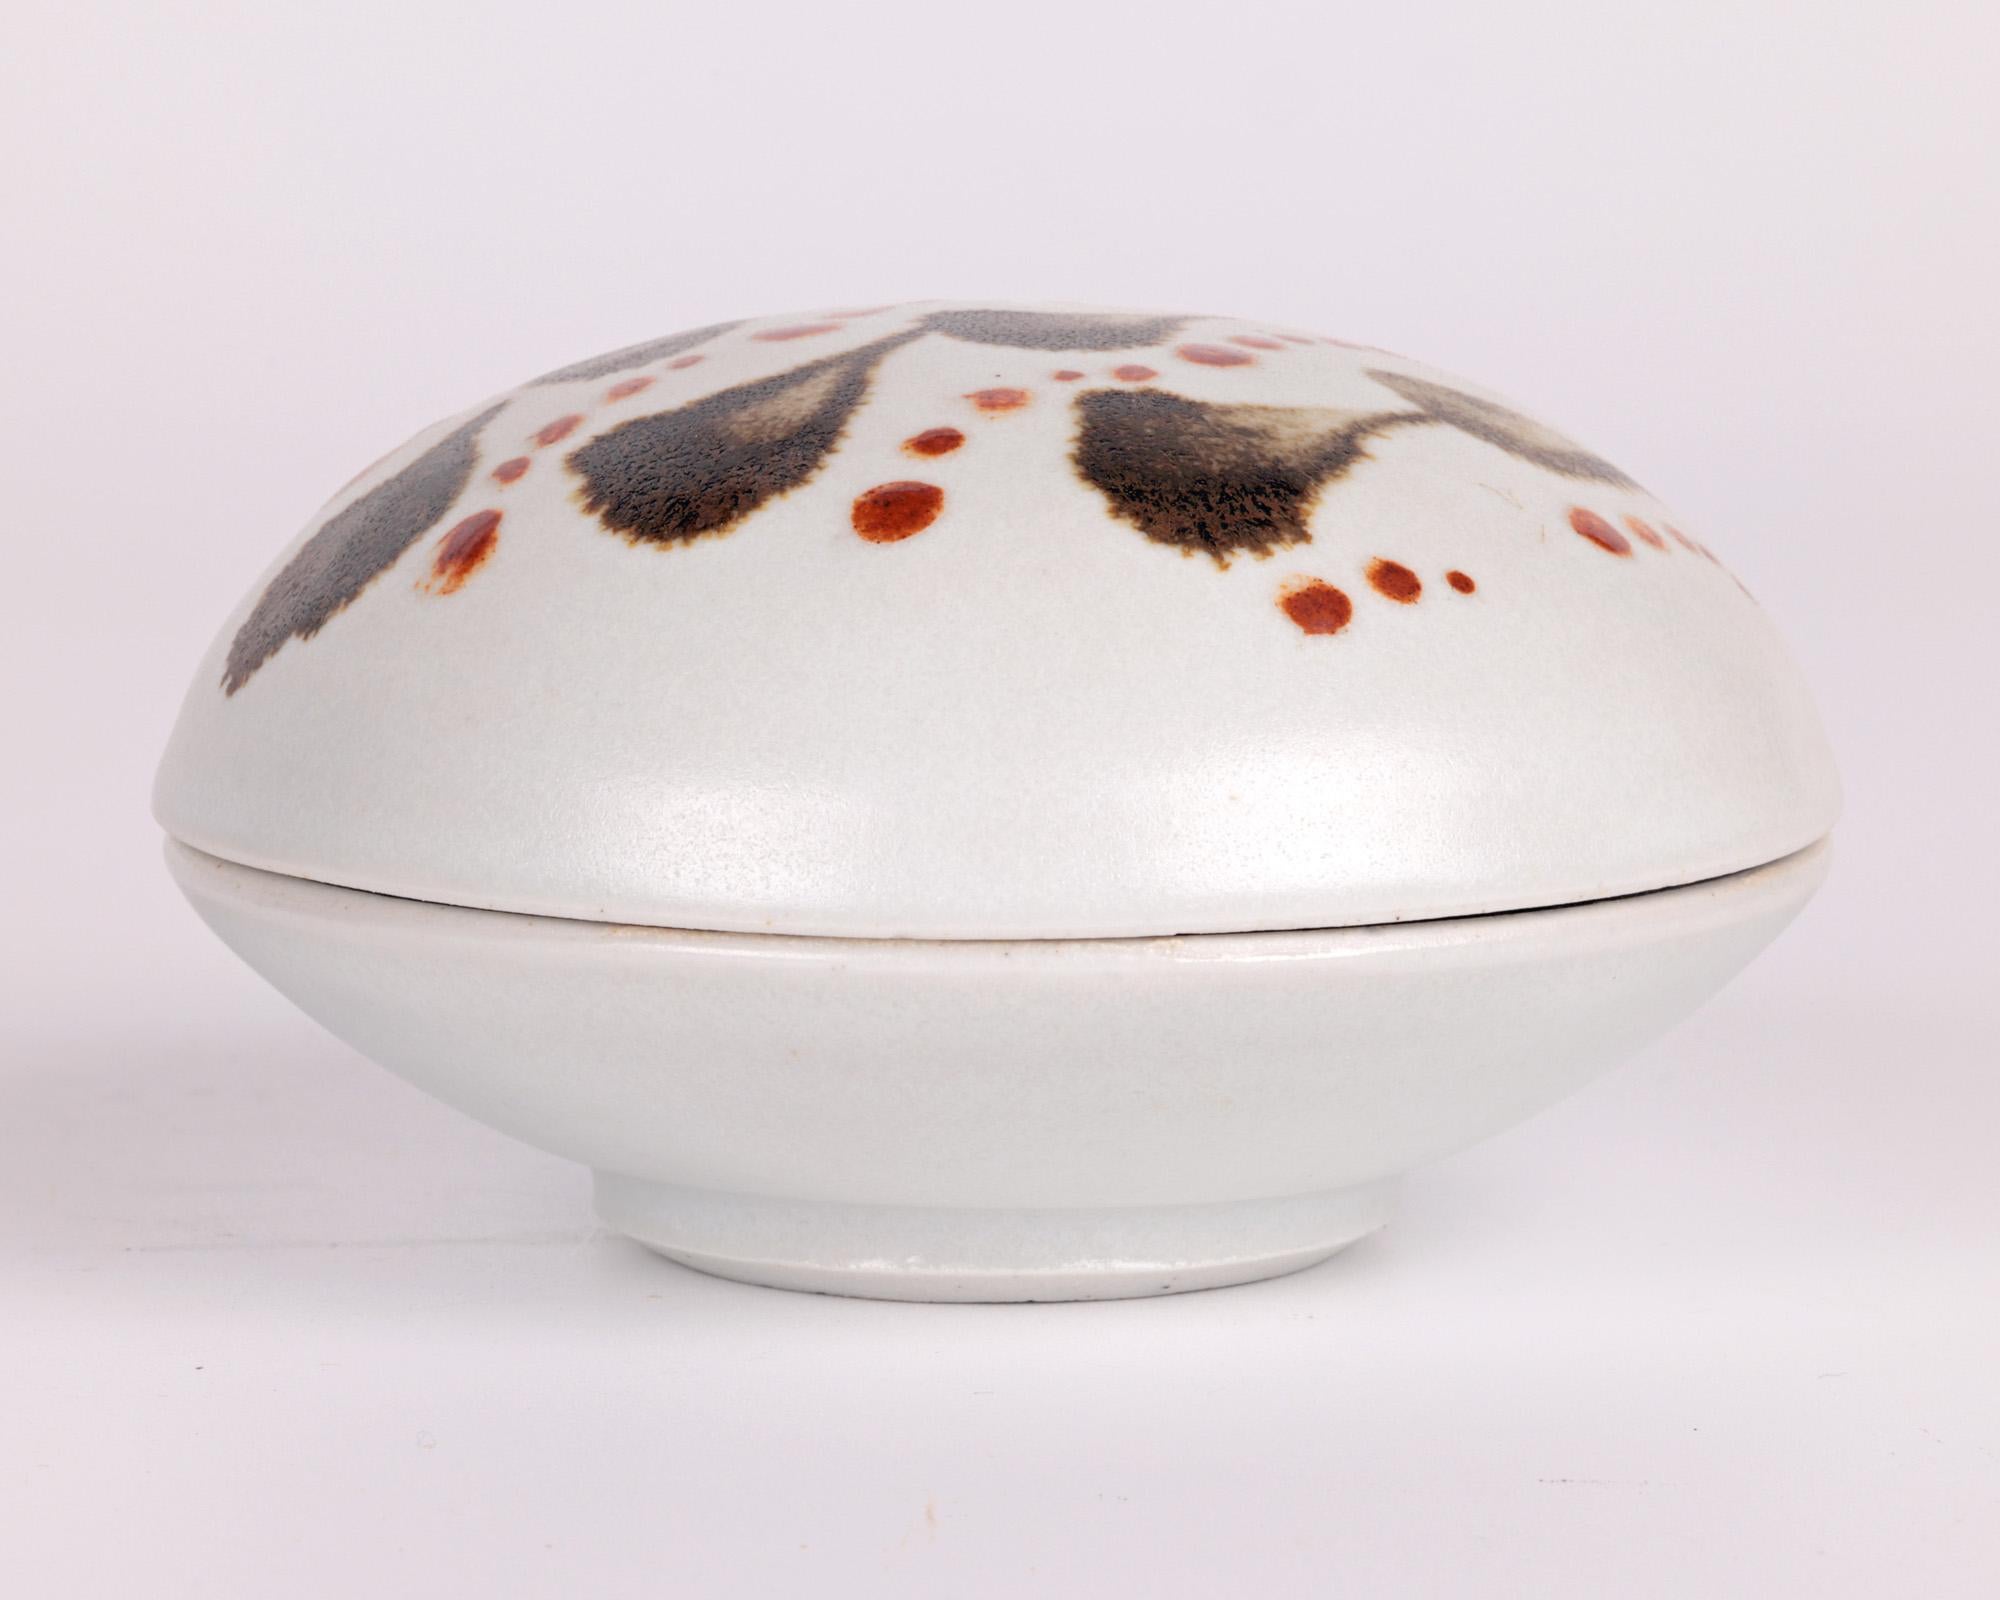 A fine and well crafted Leach Pottery studio pottery porcelain lidded pot decorated with stylized leaf and berry patterning by accomplished potter Amanda Brier and dating from the early 21st century. 

Amanda studied Studio Ceramics at Falmouth